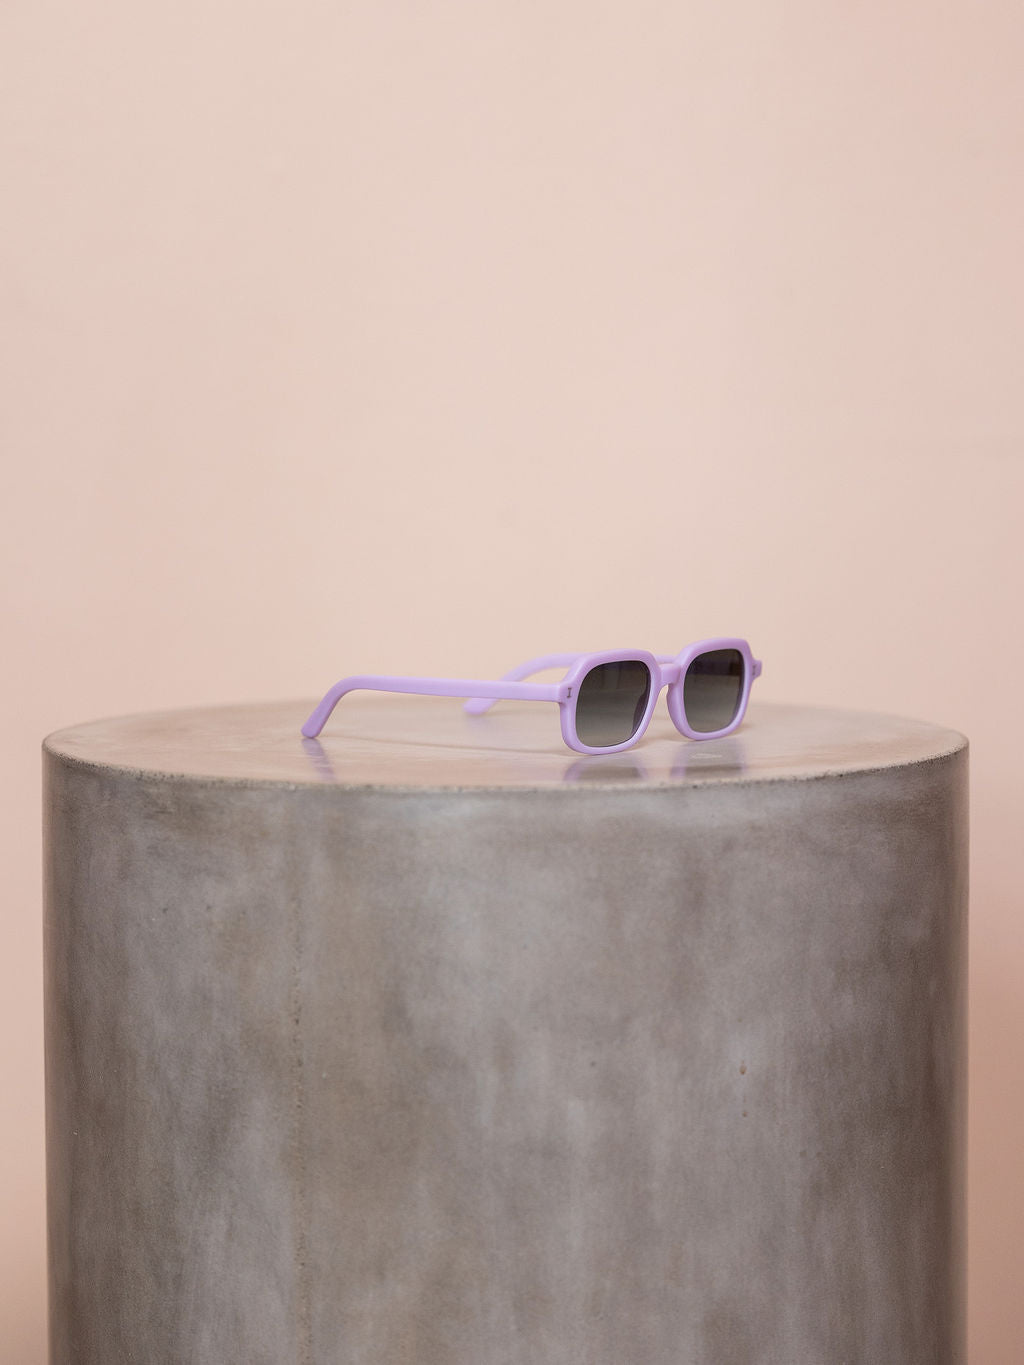 Lilac sunglasses on podium against pink background